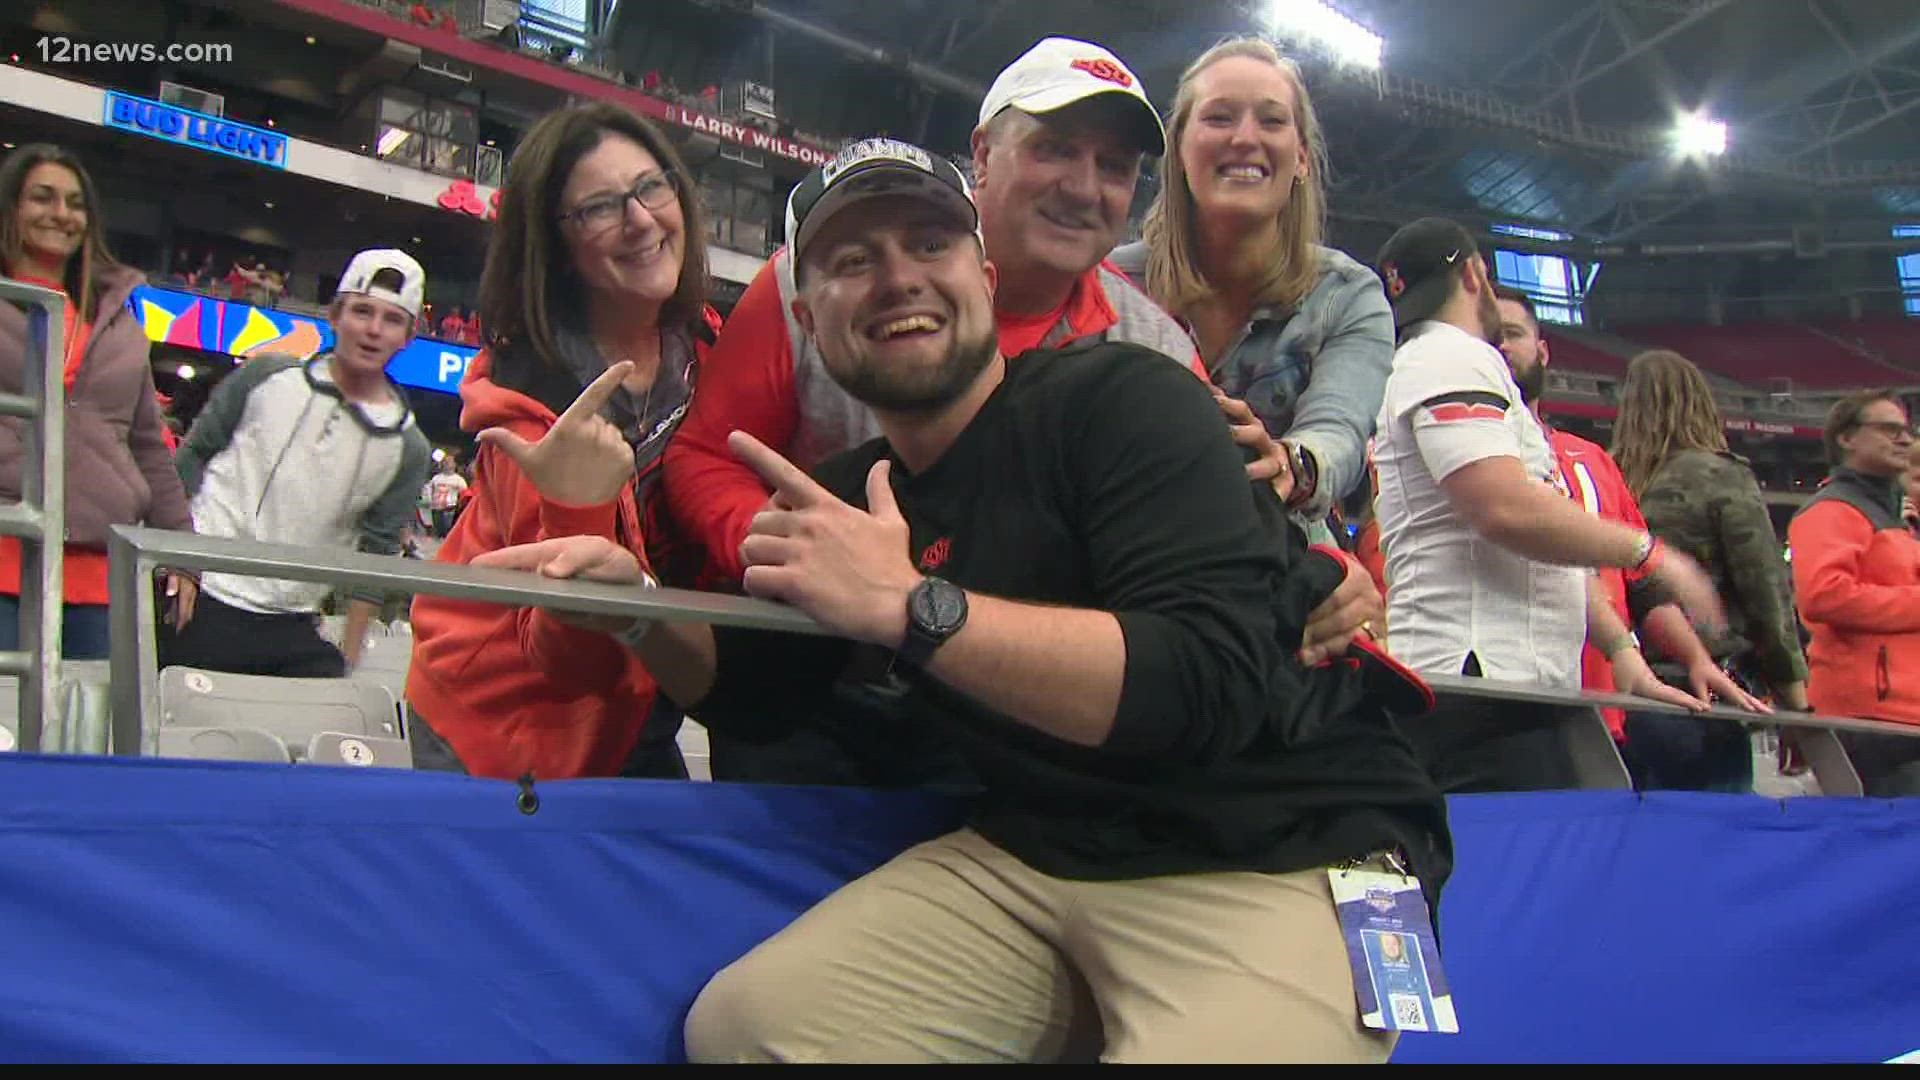 Hamilton head coach Mike Zdebski got the chance to cheer on his son, Brent, a coach for Oklahoma State, as the Cowboys won the Fiesta Bowl